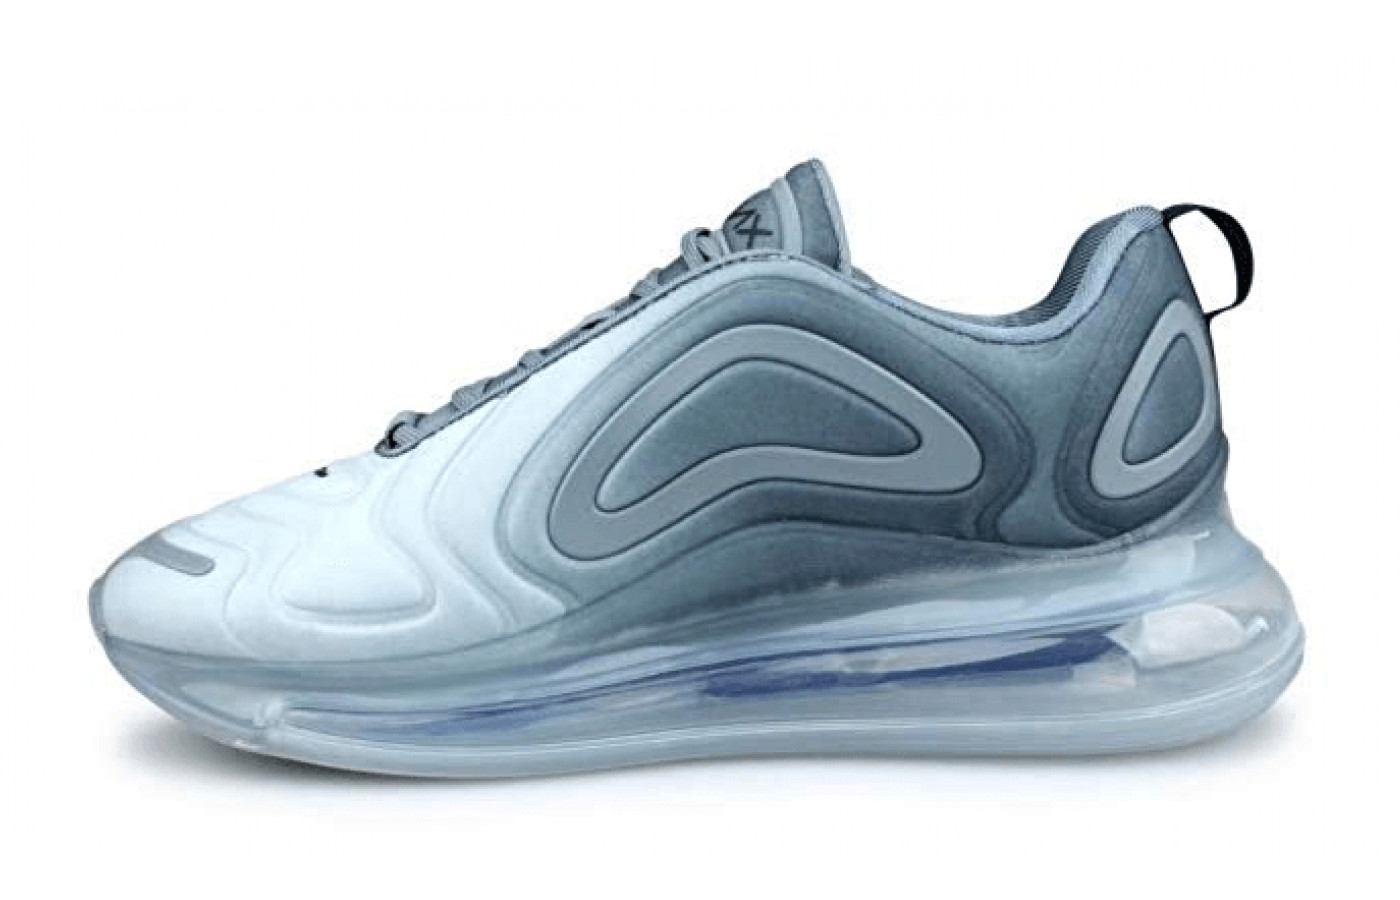 The Air Max 720 offers an incredibly responsive wear.